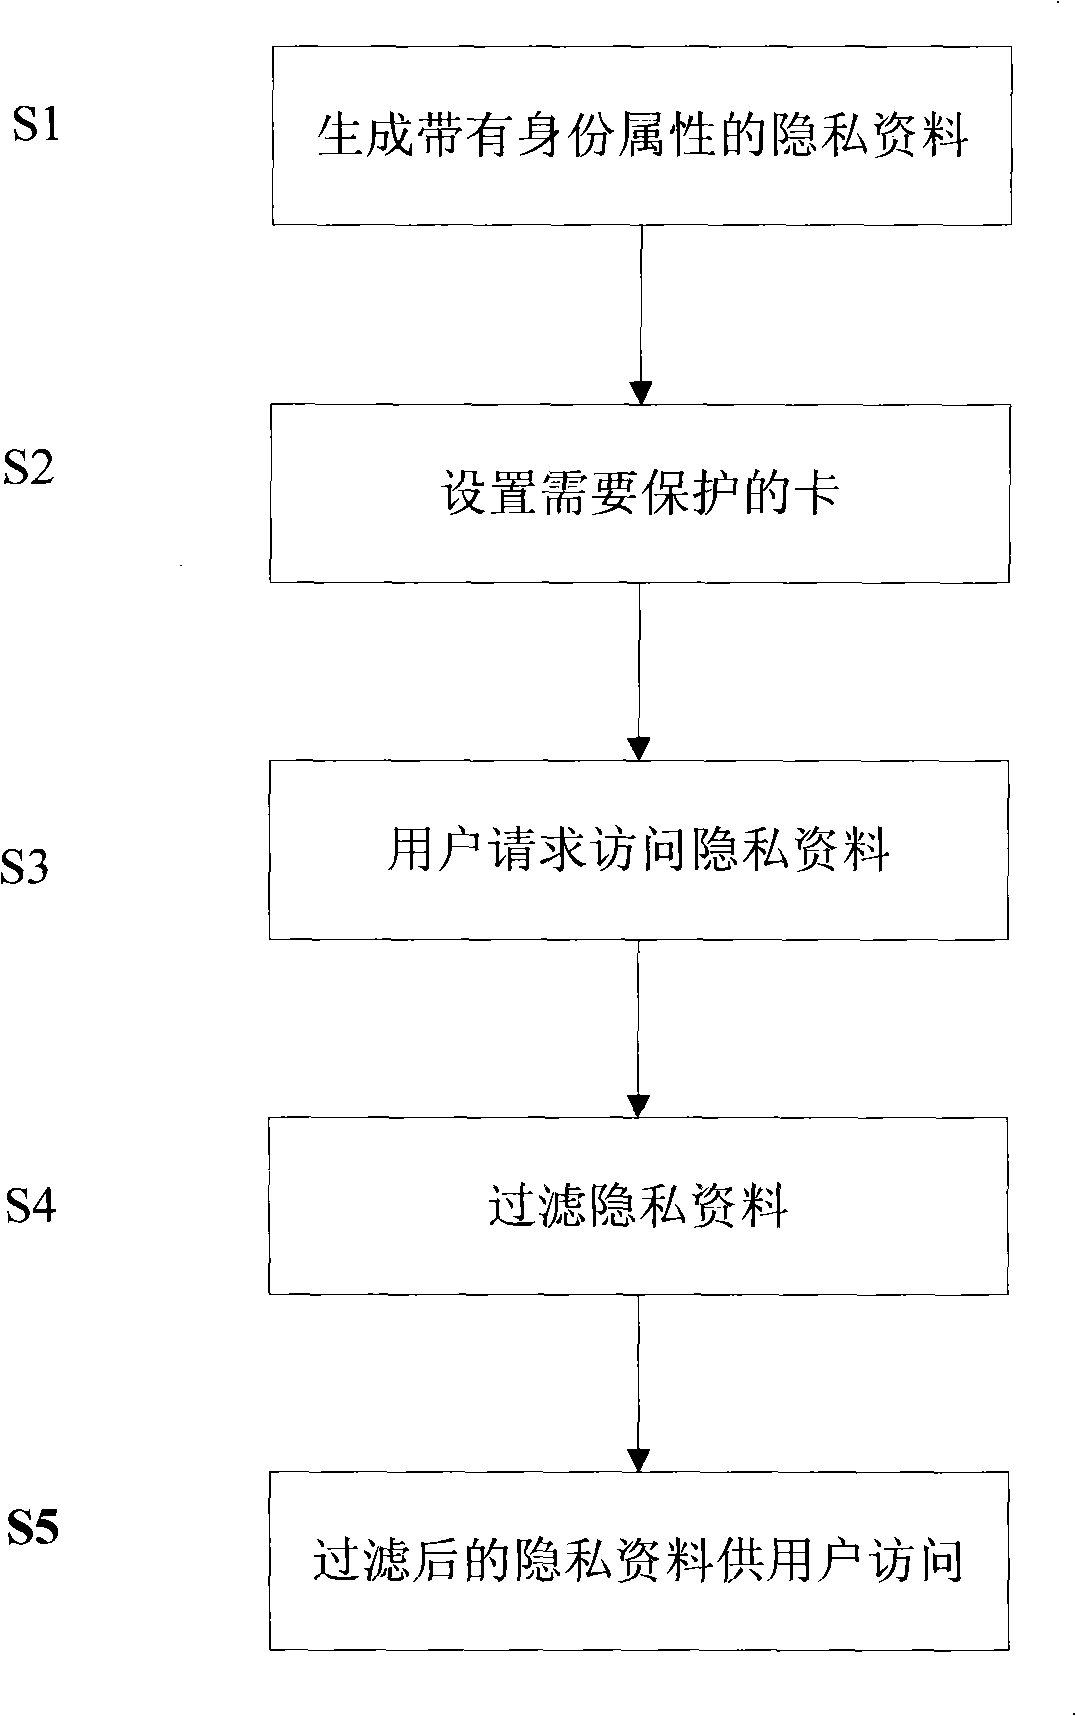 Method for protecting privacy data of mobile telephone with multiple cards